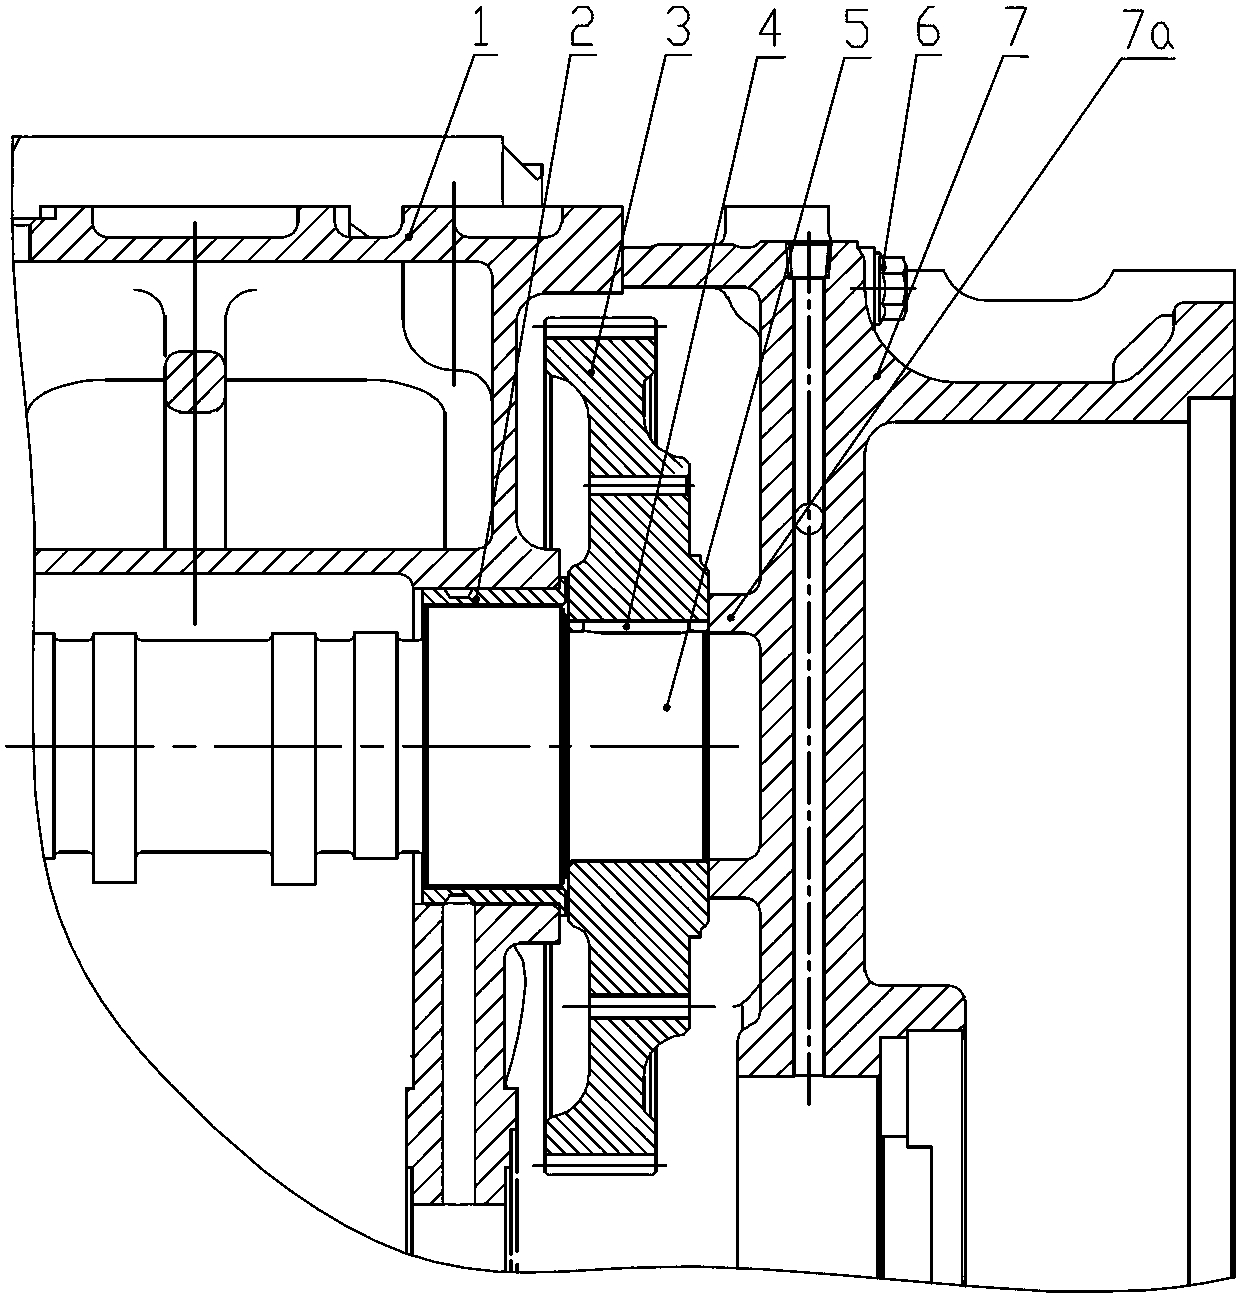 Axial positioning and connecting structure of cam shaft